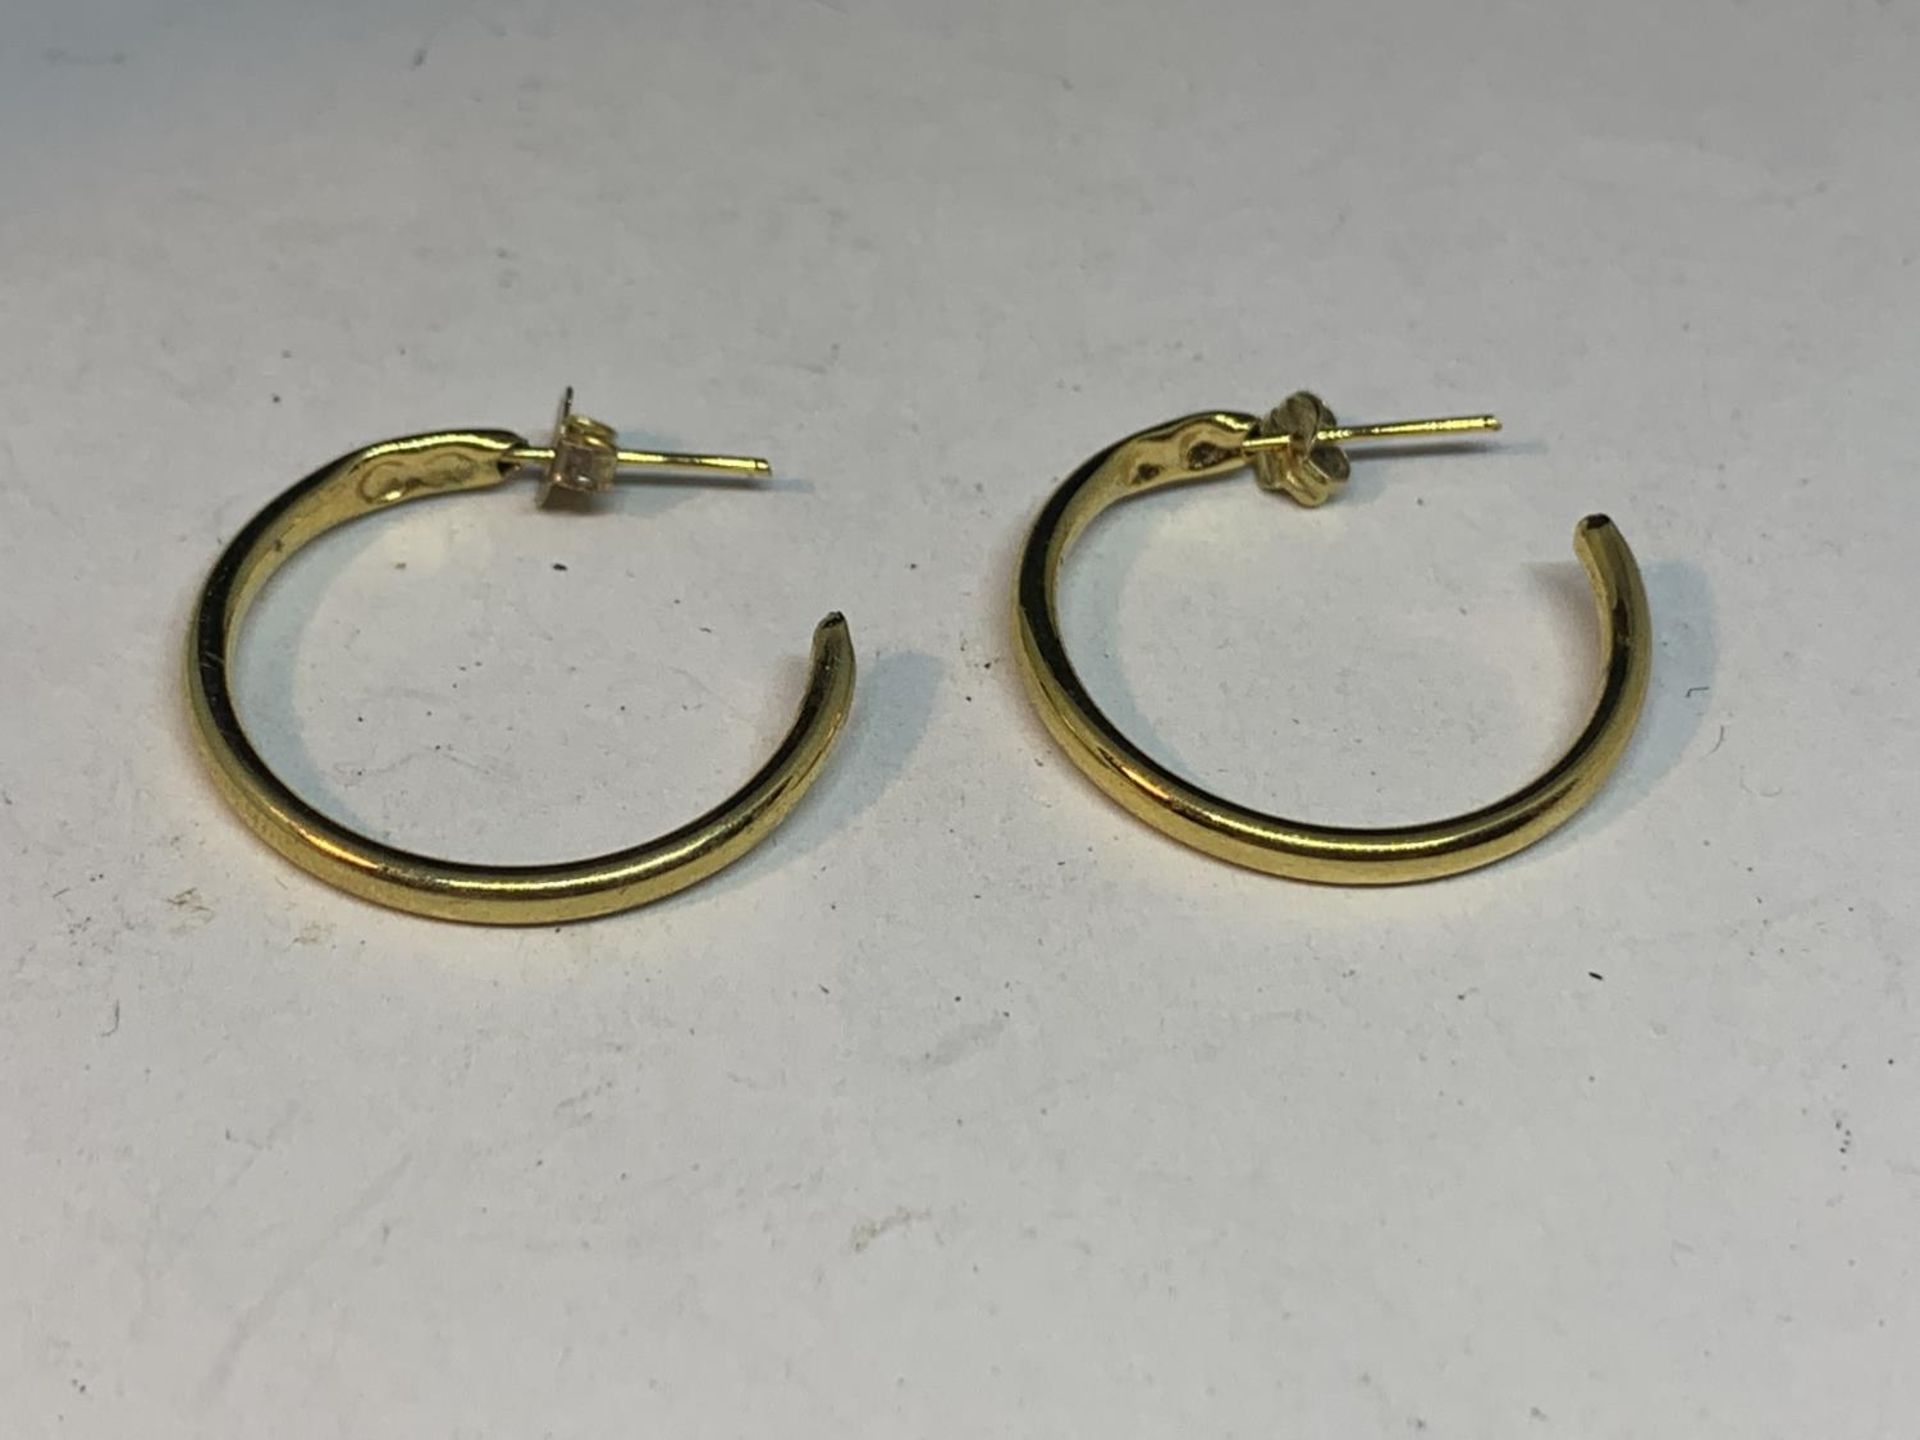 A PAIR OF LARGE 9 CARAT GOLD HOOP EARRINGS IN A PRESENTATION BOX - Image 2 of 2